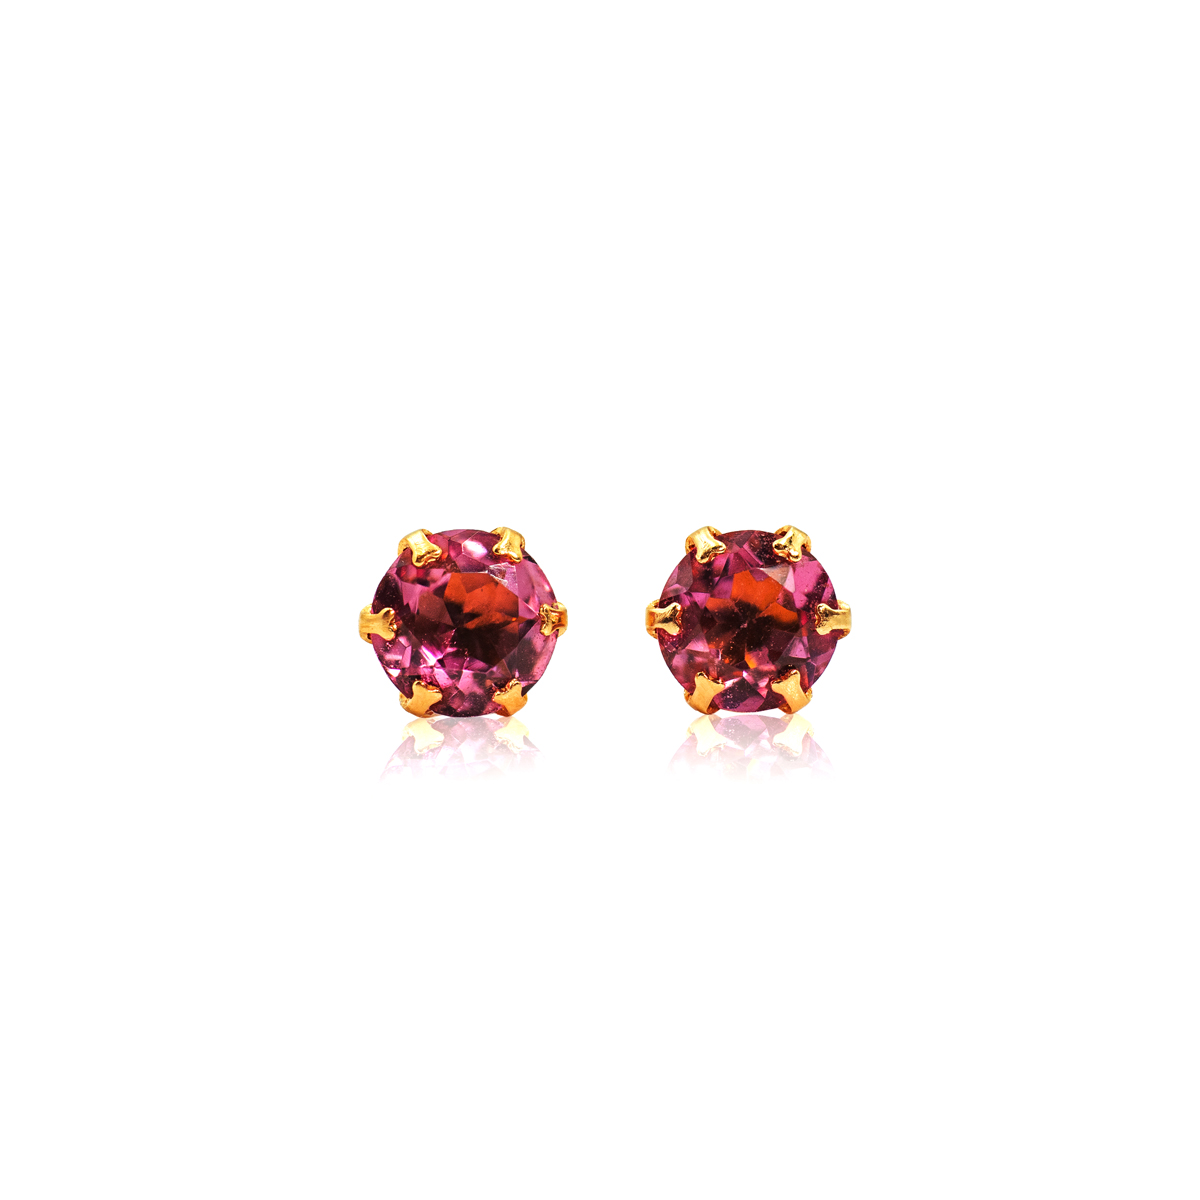 Stud Earrings in 18k Yellow Gold with Pink Tourmaline